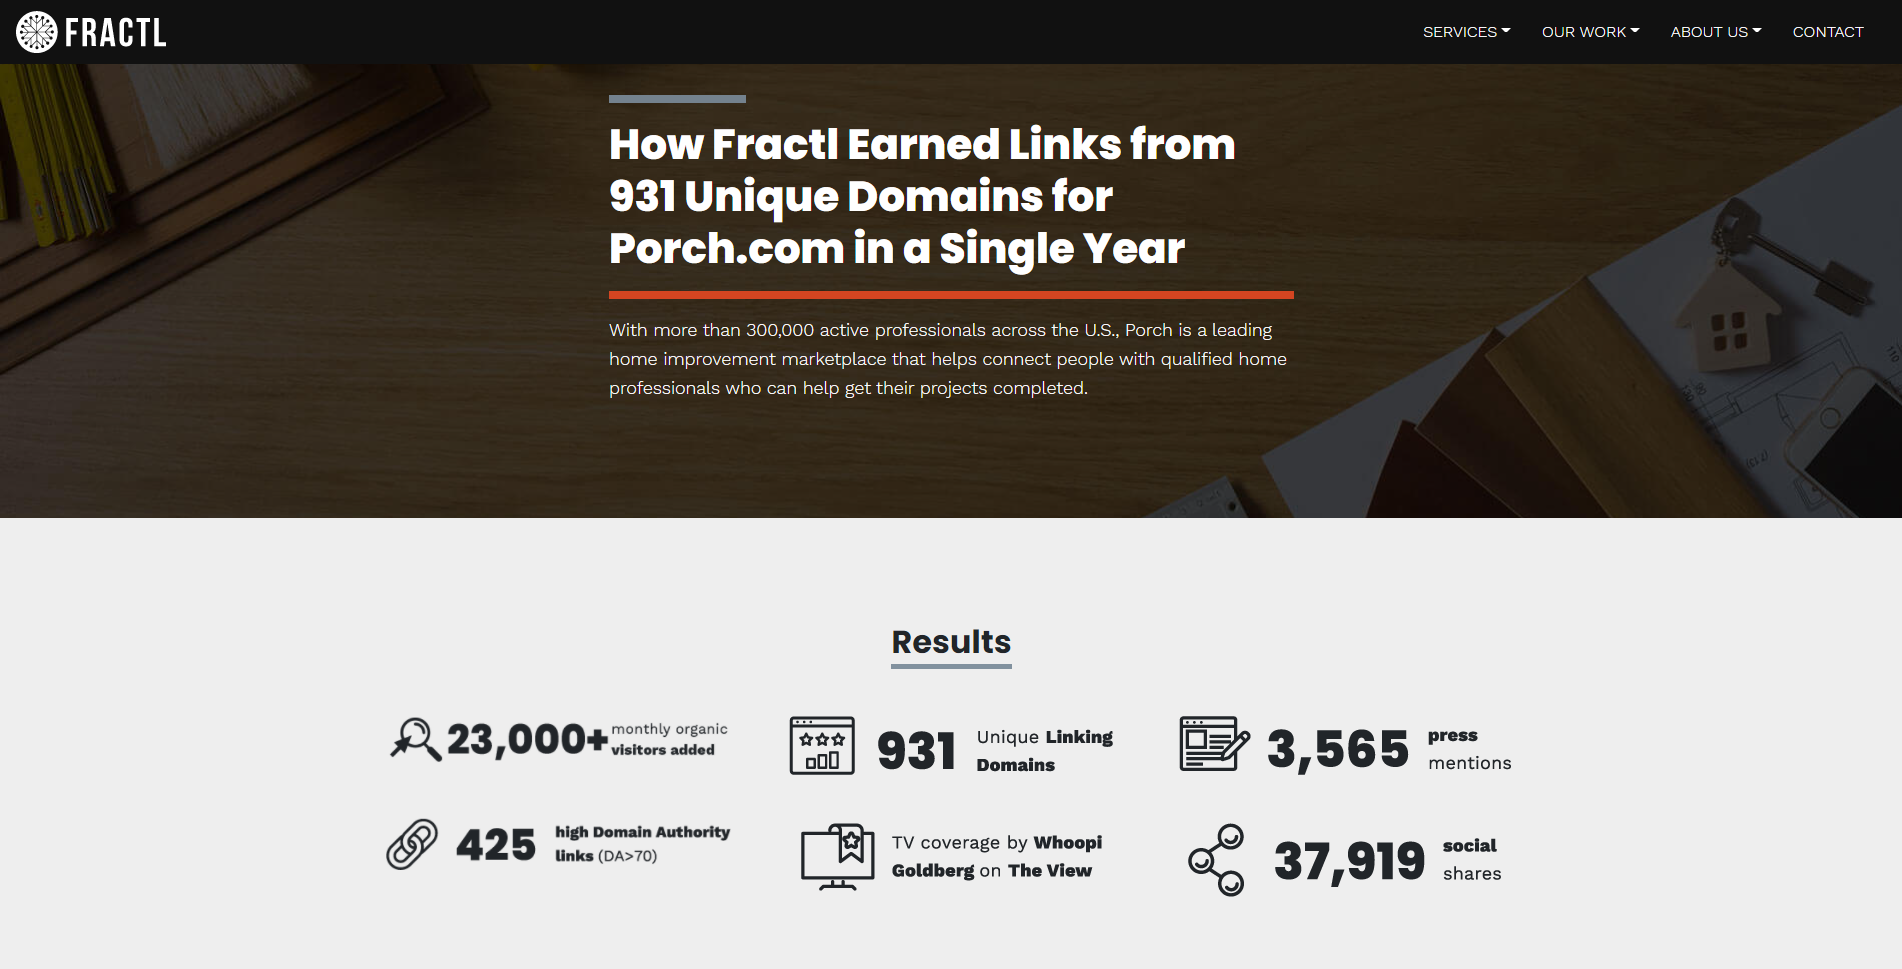 Fractl link building case study showing how they earned 931 unique domains for Porch.com in a year